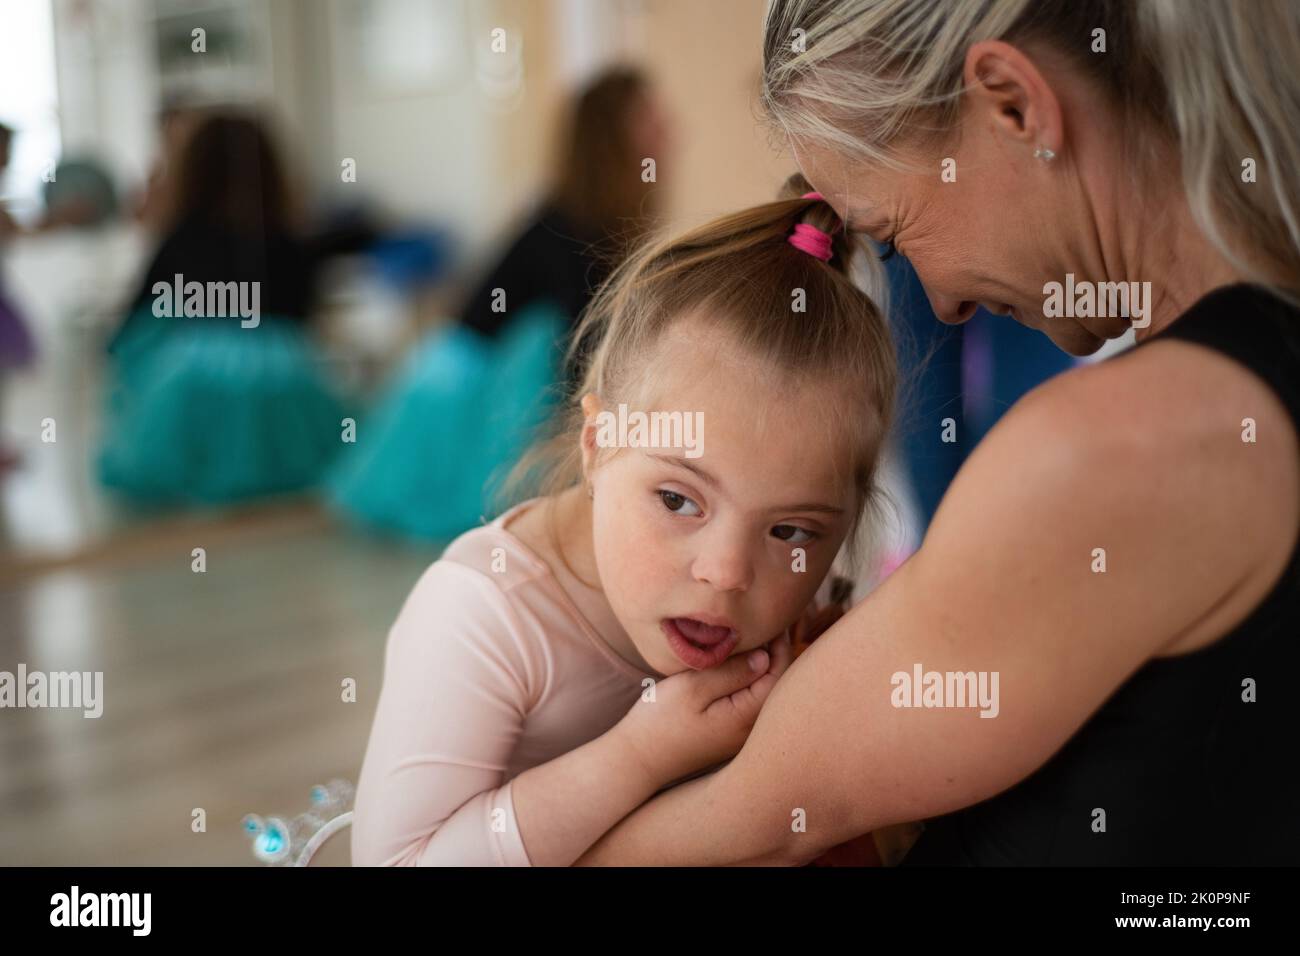 Little girl with down syndrome waiting for ballet class with her mother. Concept of integration disabled children and parenthood. Stock Photo